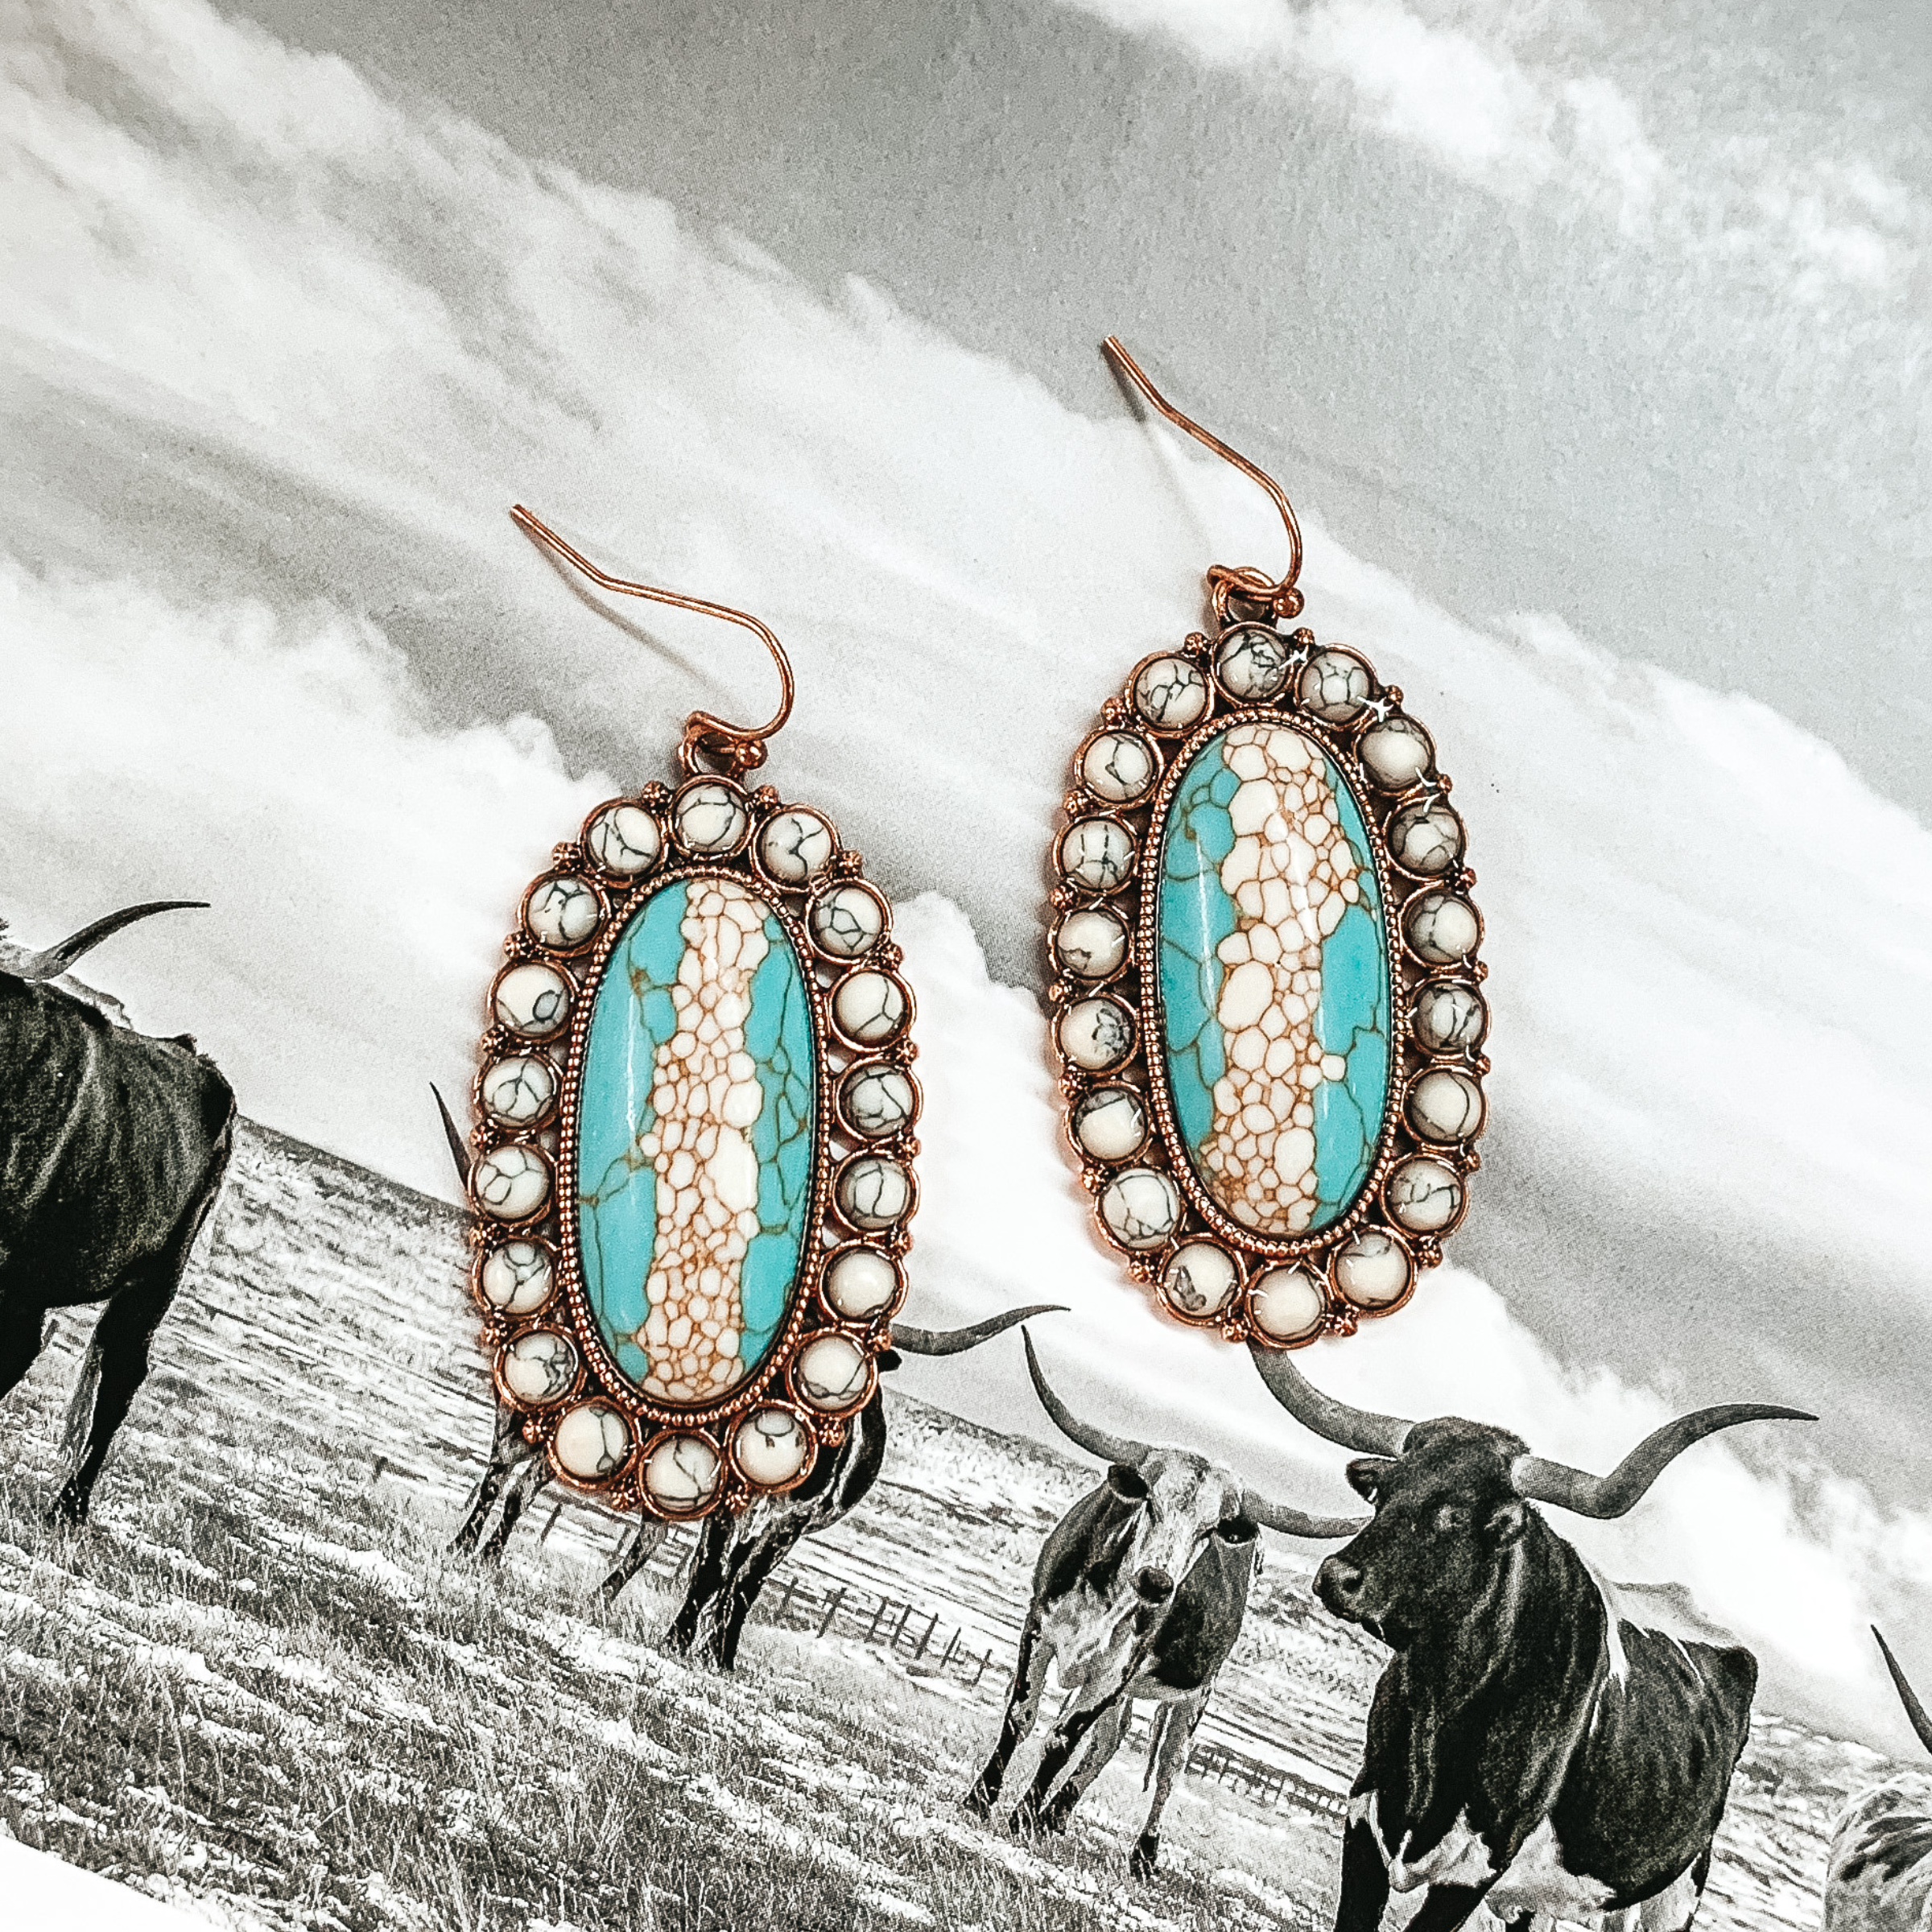 These oval, stone cluster earrings with a large center stone and smaller stones outlining it. The colors include turquoise and white. These earrings are pictured on a black and white picture of longhorns. 